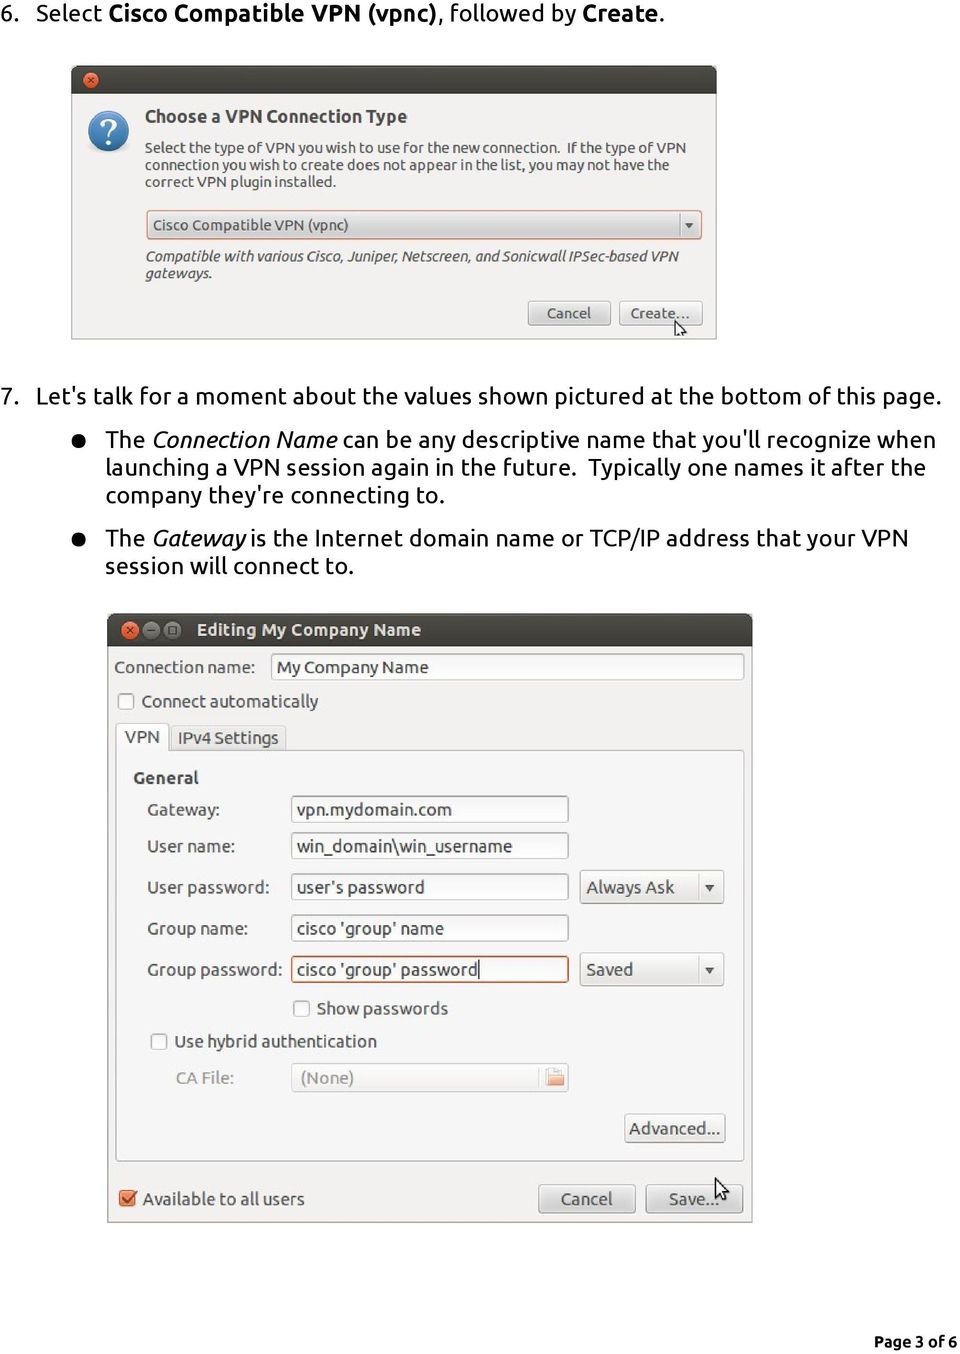 The Connection Name can be any descriptive name that you'll recognize when launching a VPN session again in